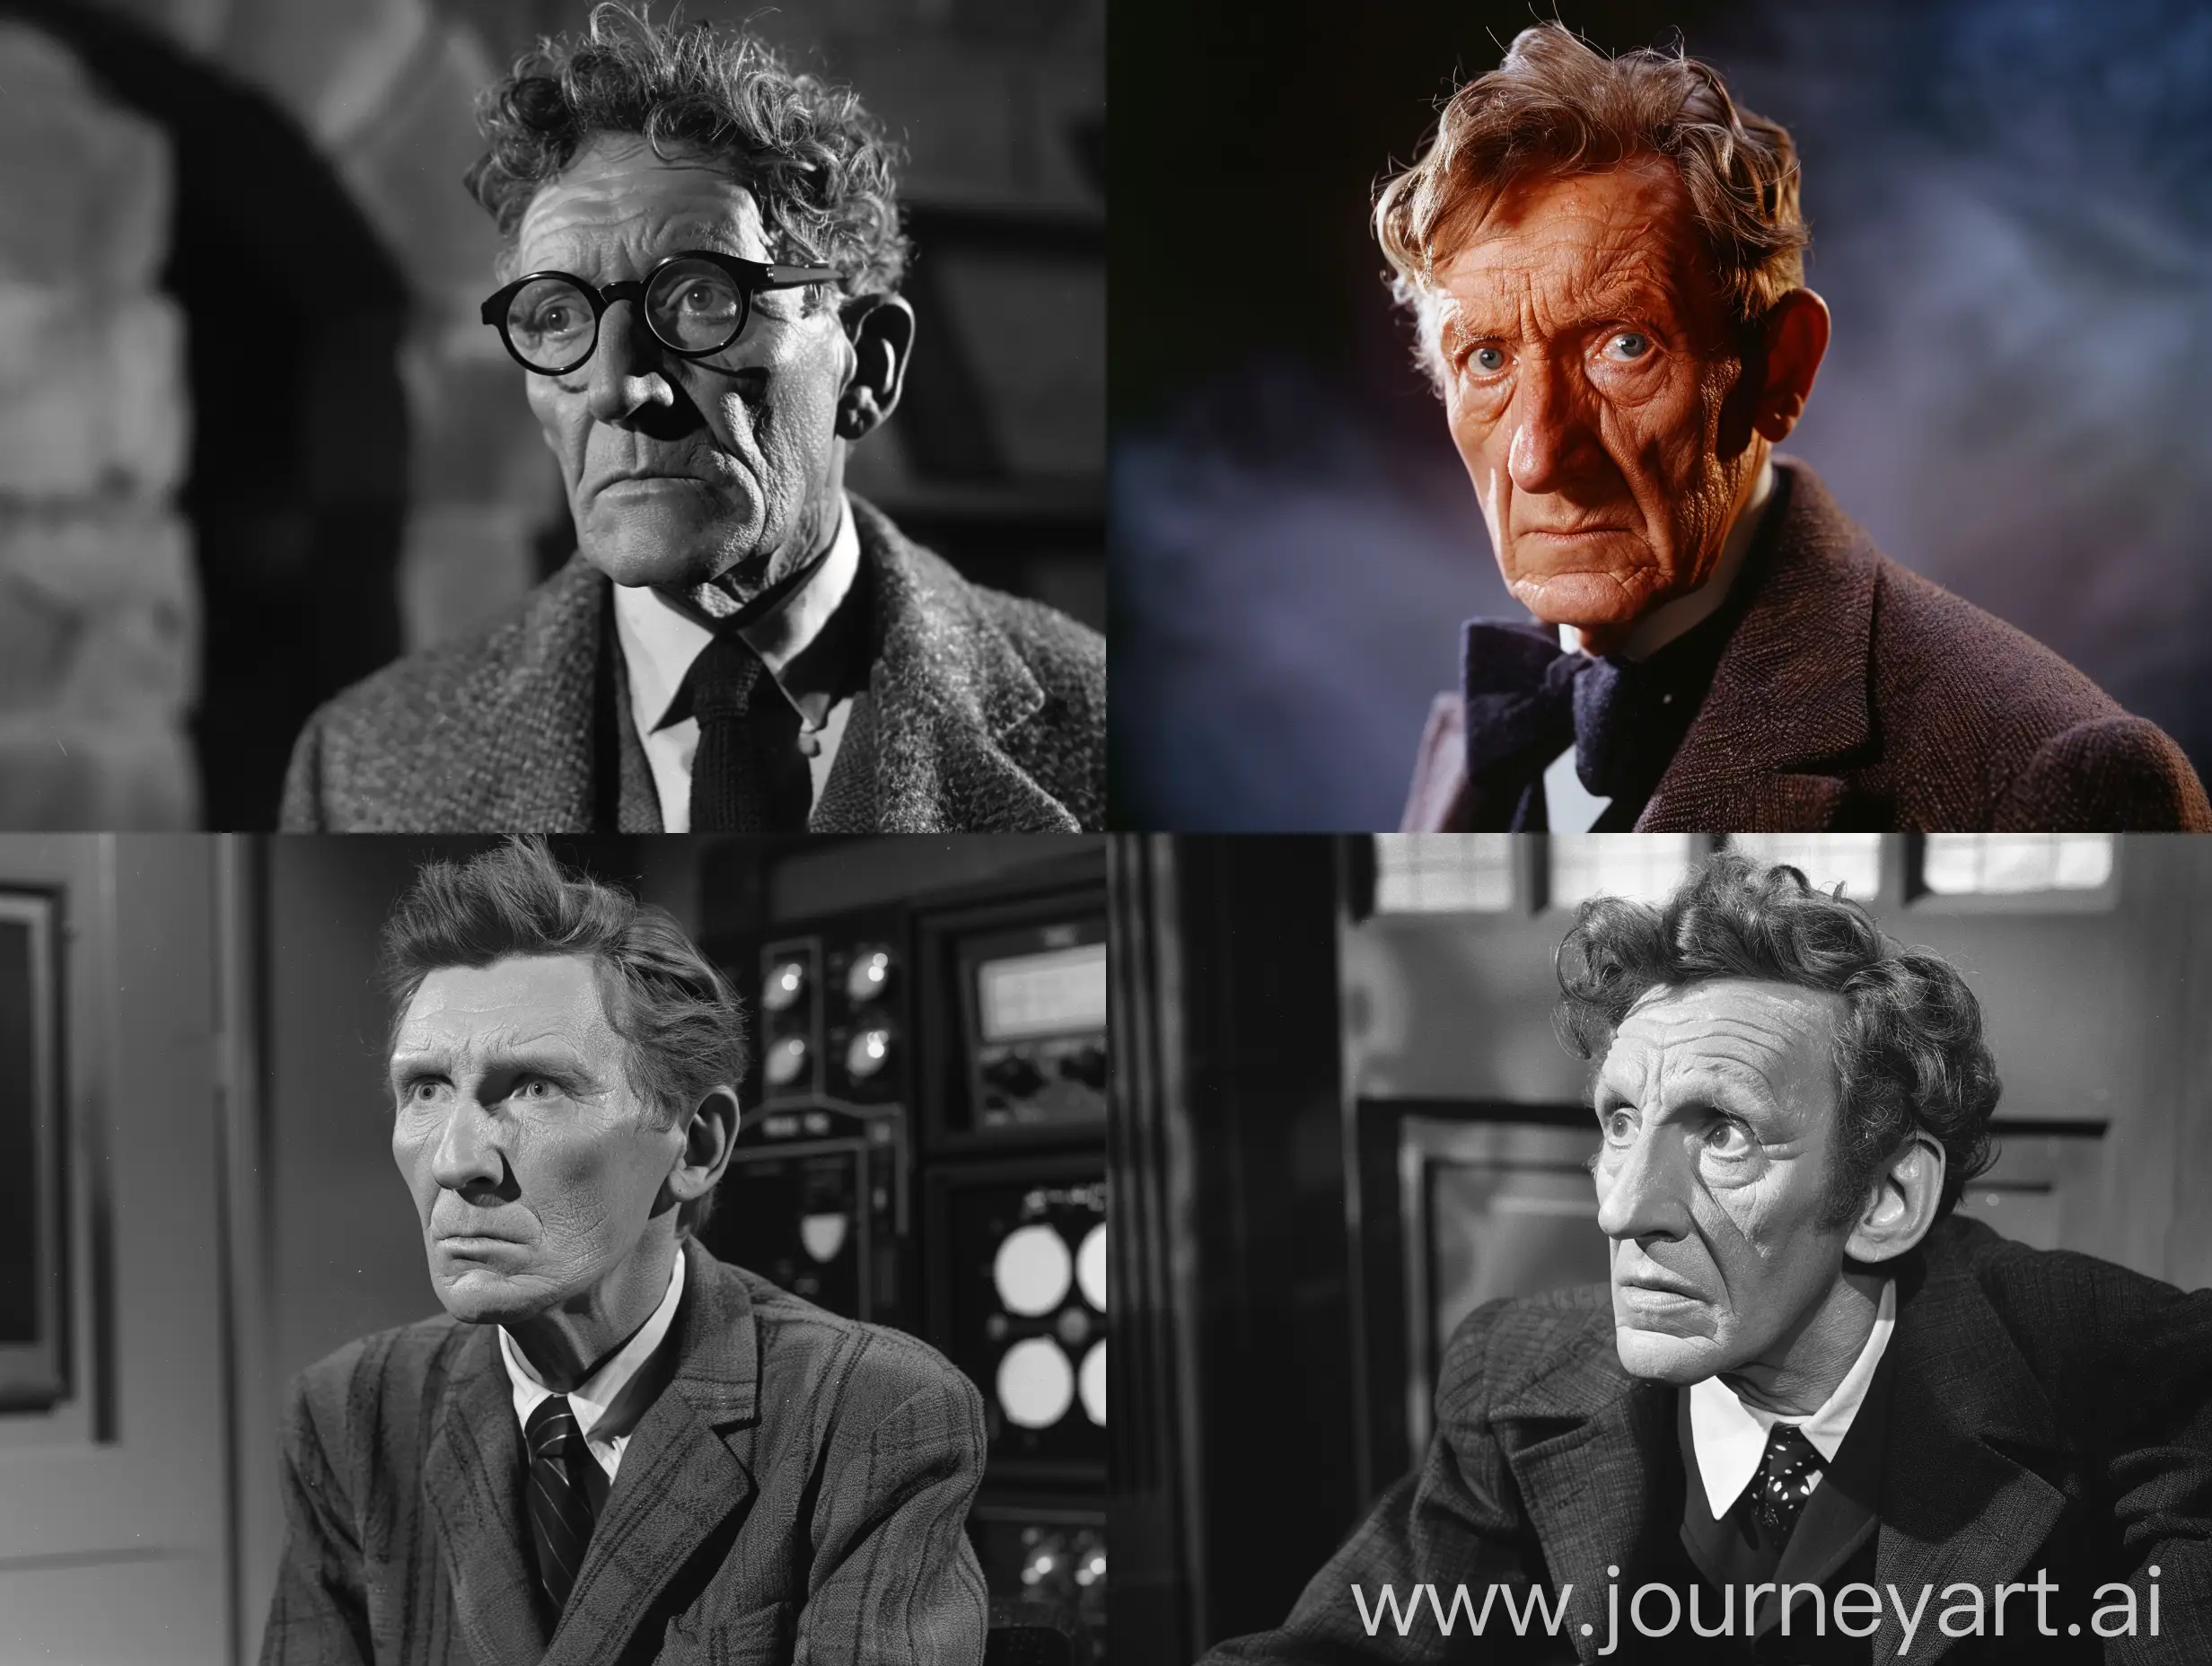 Burgess Meredith as the first 1960s version of The Doctor from Doctor Who